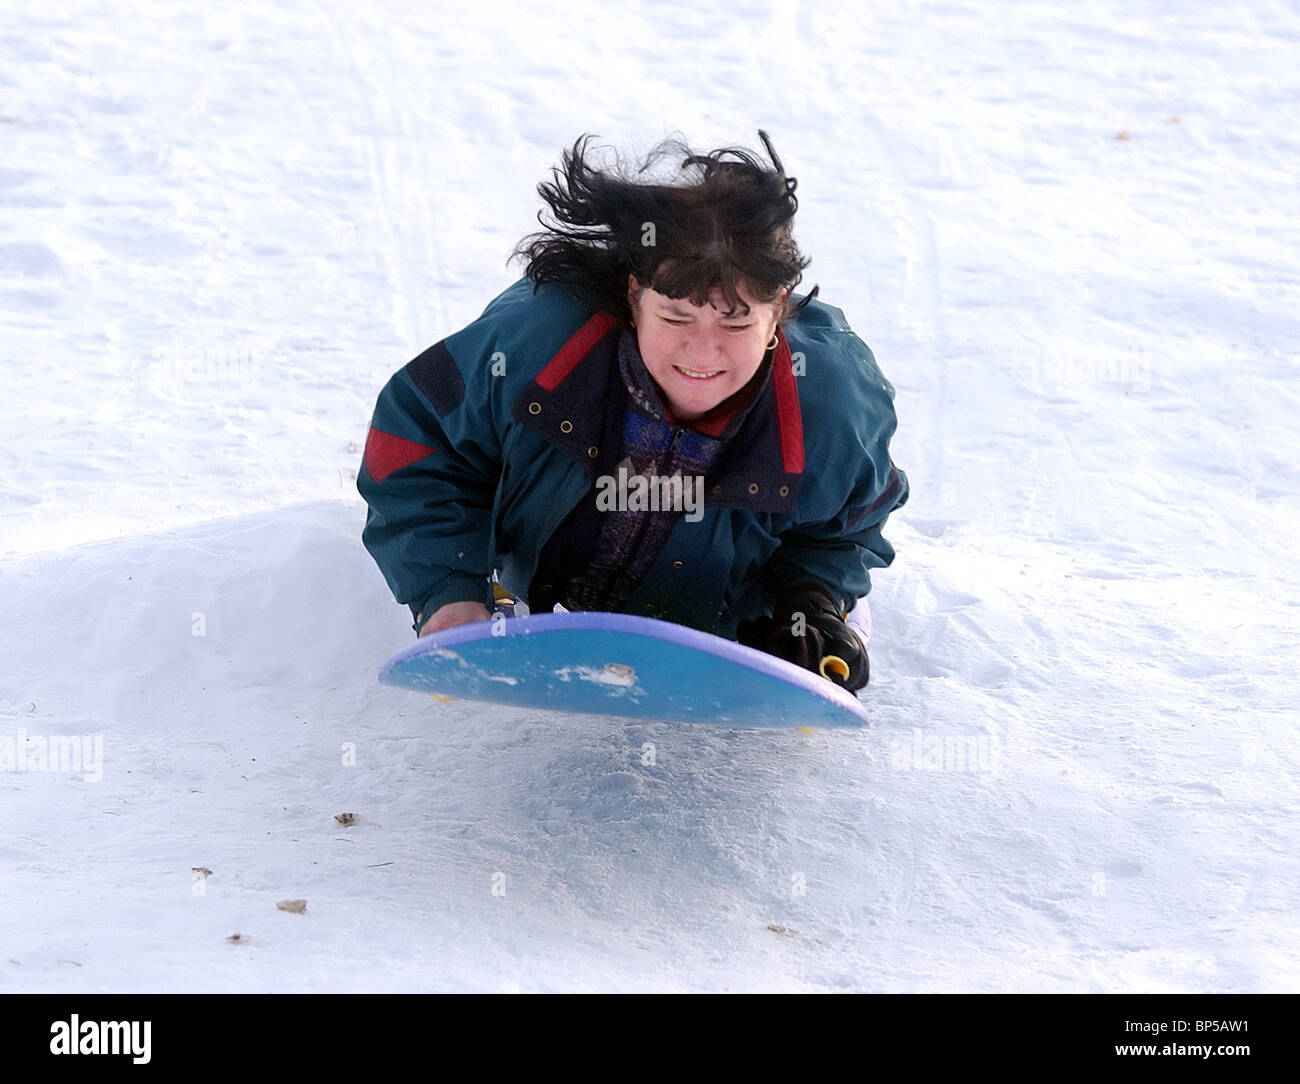 A child sledding jumping off snow ramp in CT USA during winter Stock Photo